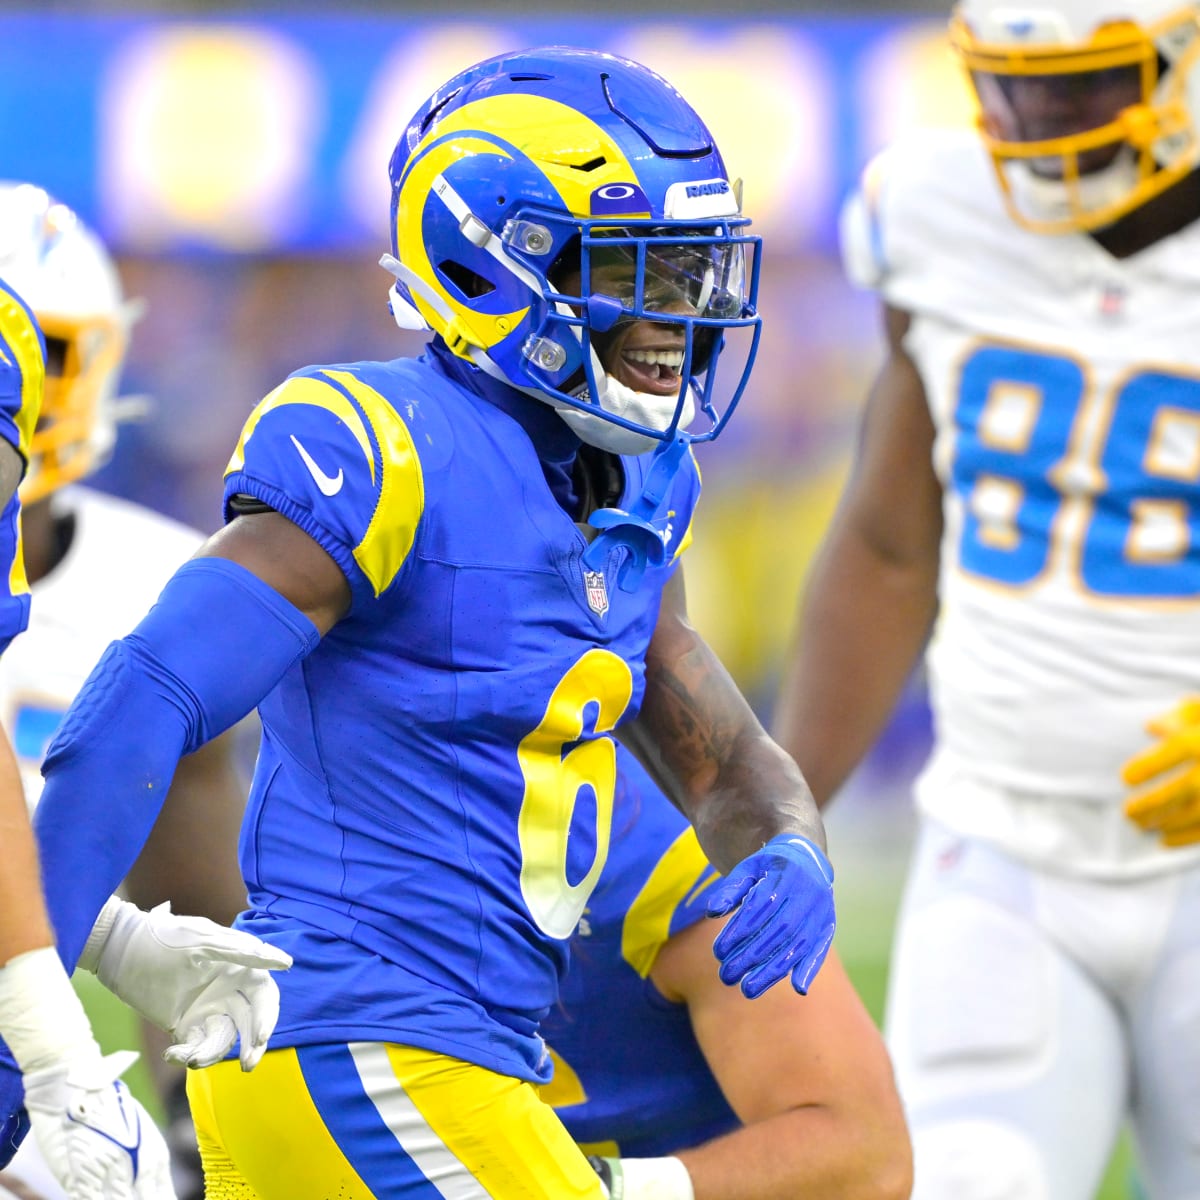 LA Rams uniforms could be filled with rookies today